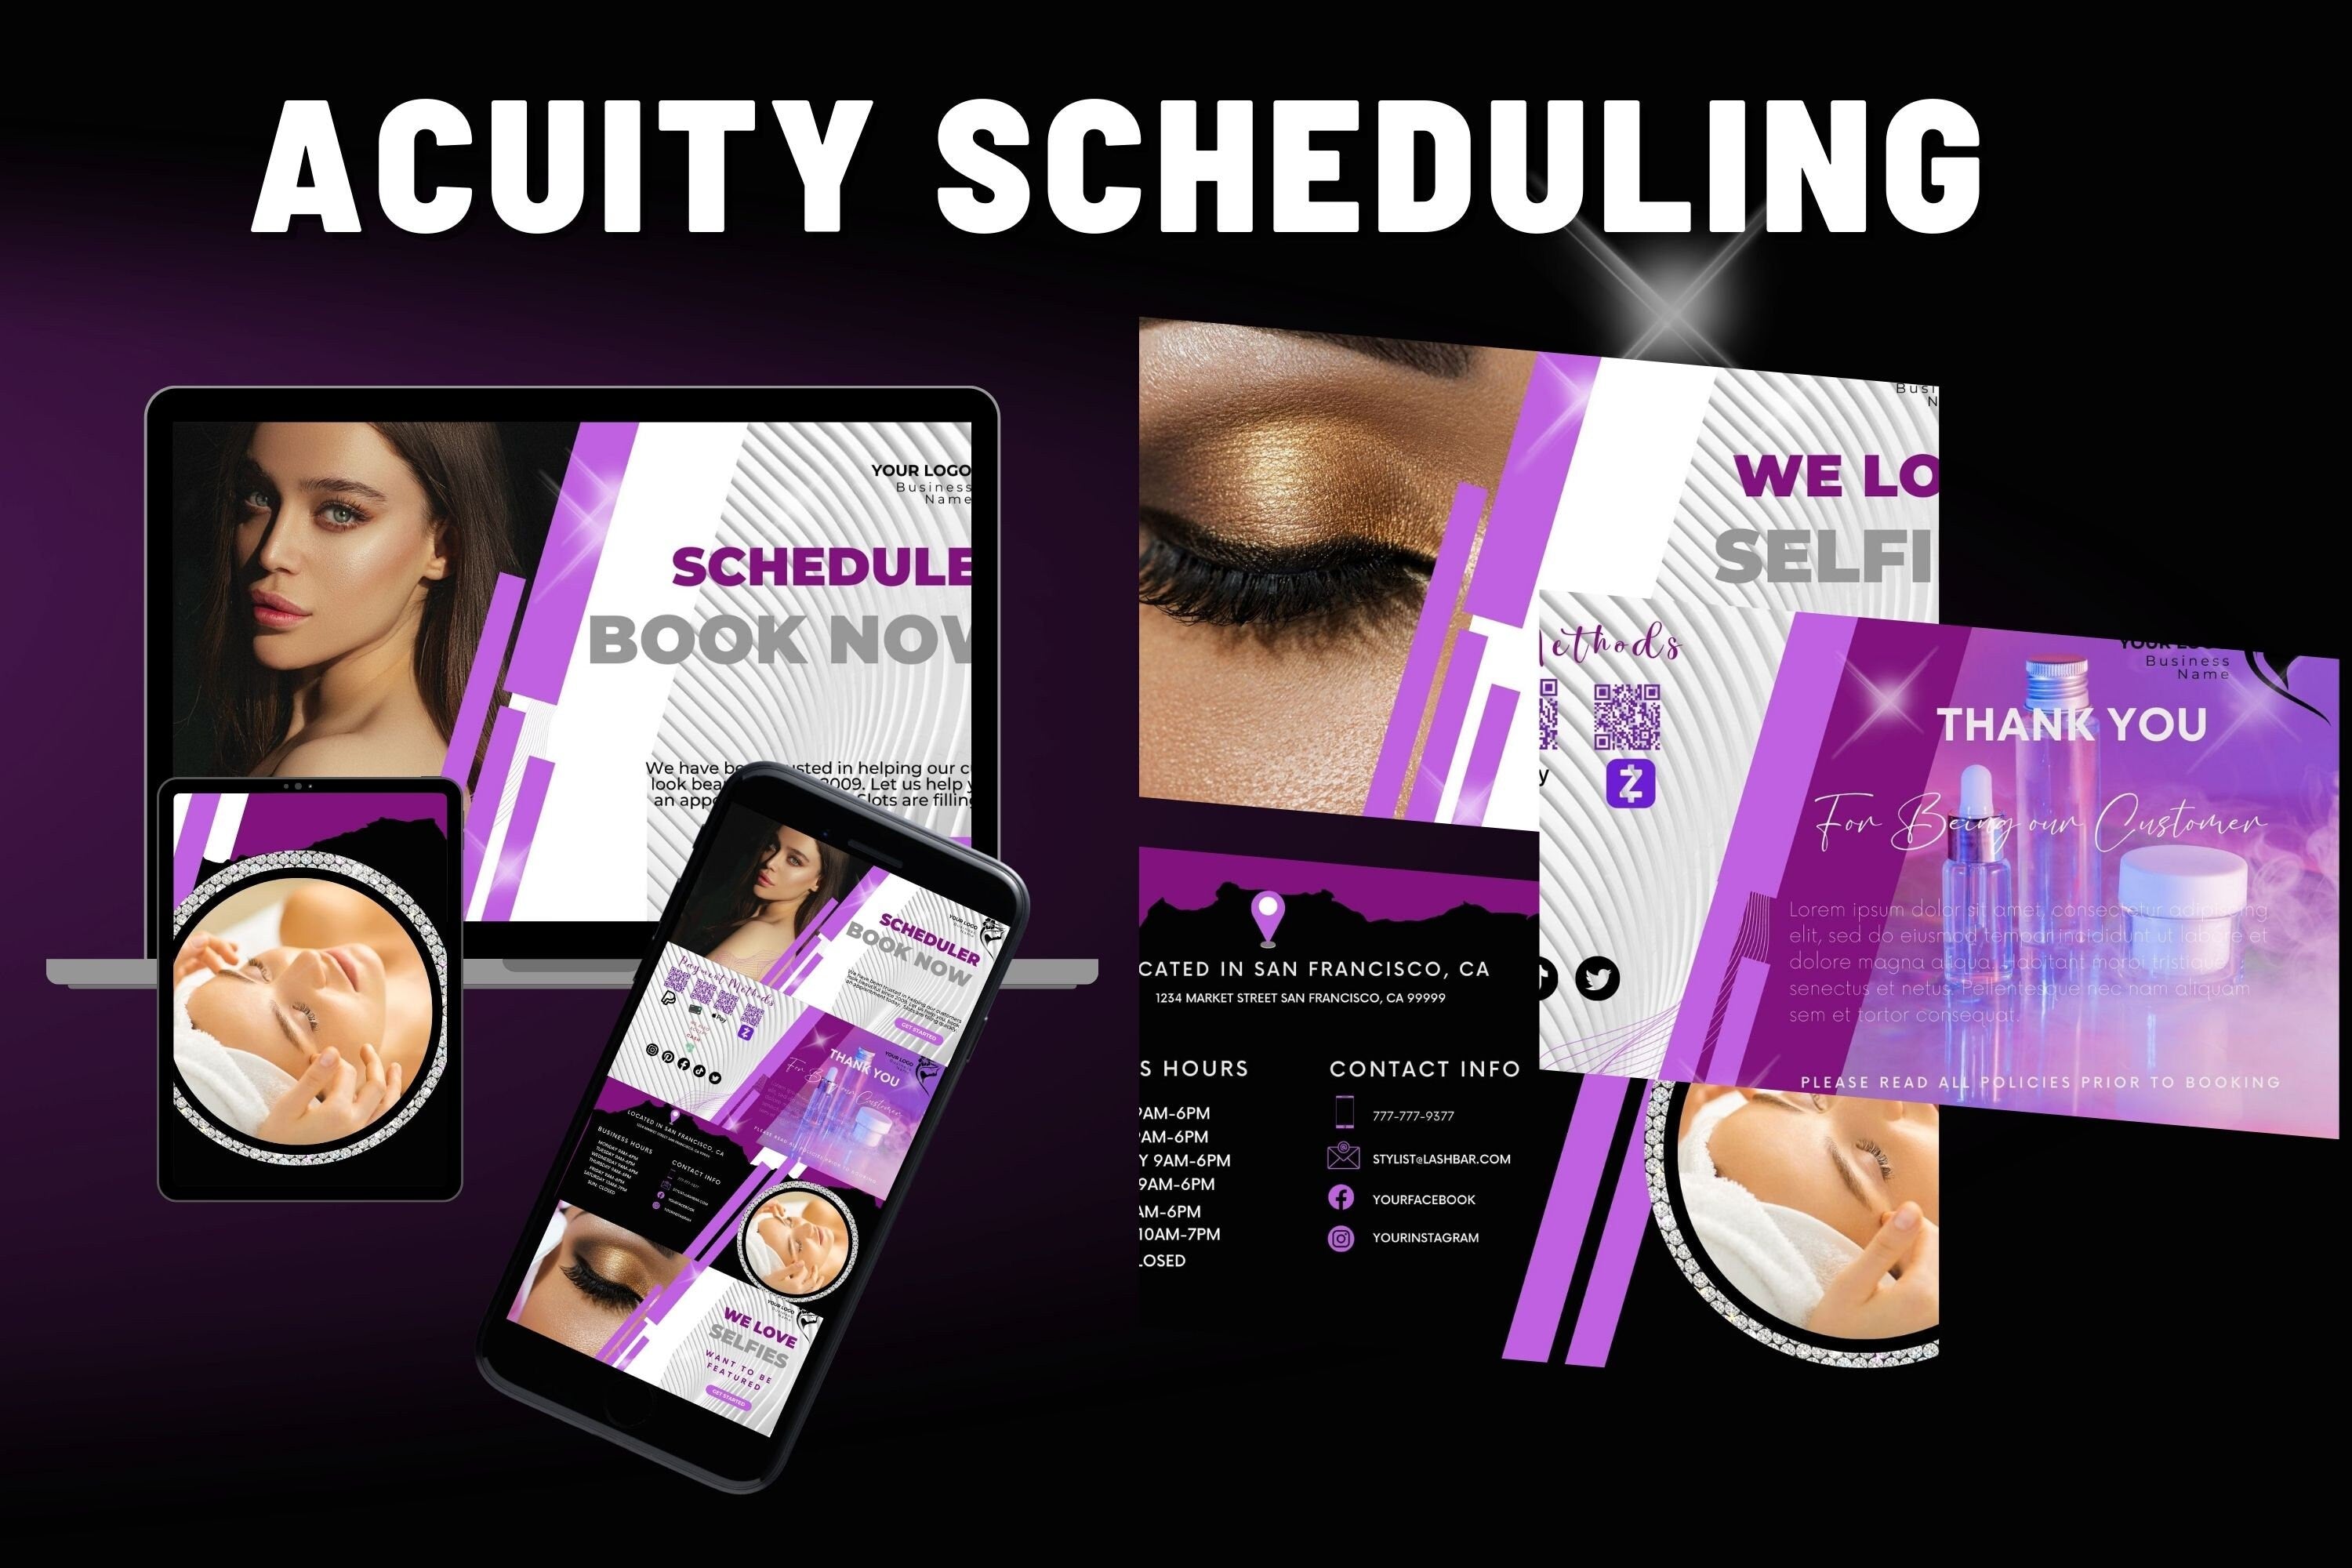 Acuity Scheduling Banner and Video Template, Flyer, Beauty Shop, Virtual Scheduling, Acuity Appointment, Website Design, Business Flyer